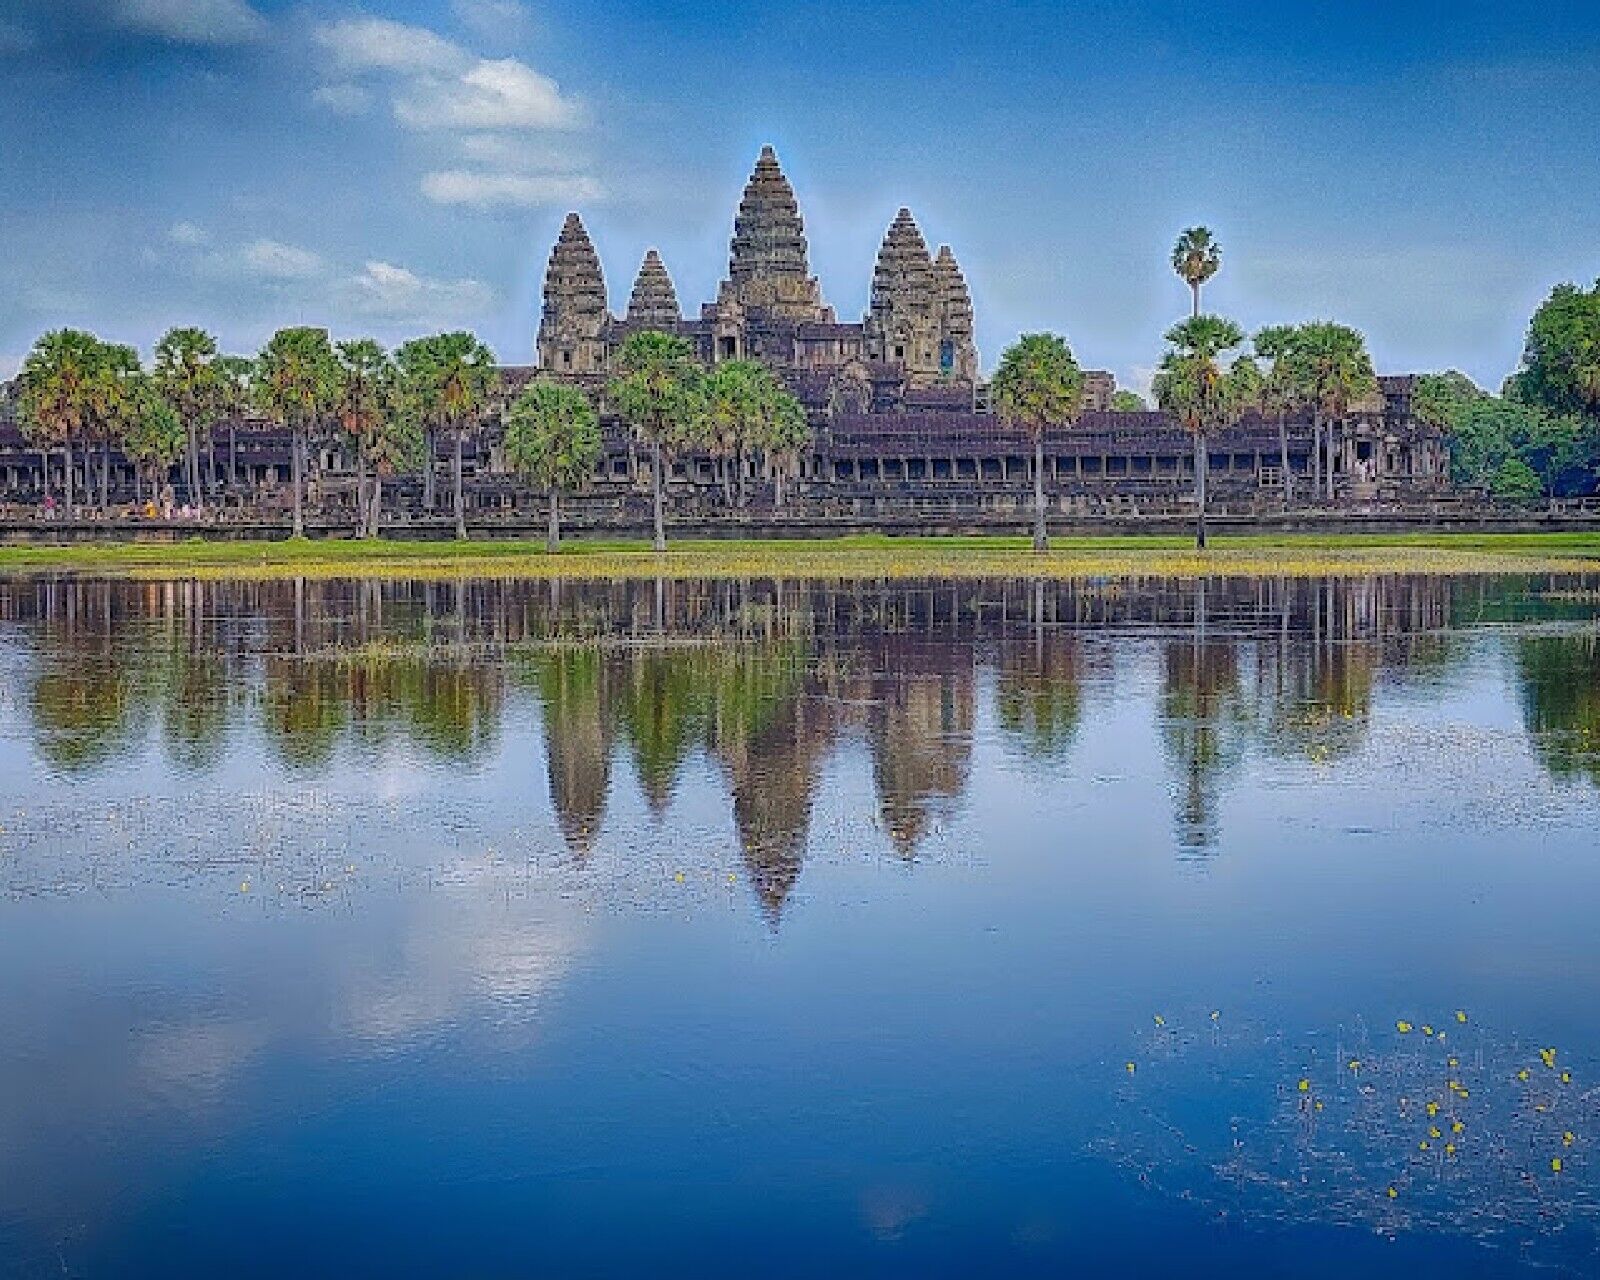 Angkor Wat - Hindu temple in Cambodia – Holographic 11x14 Matted Frame